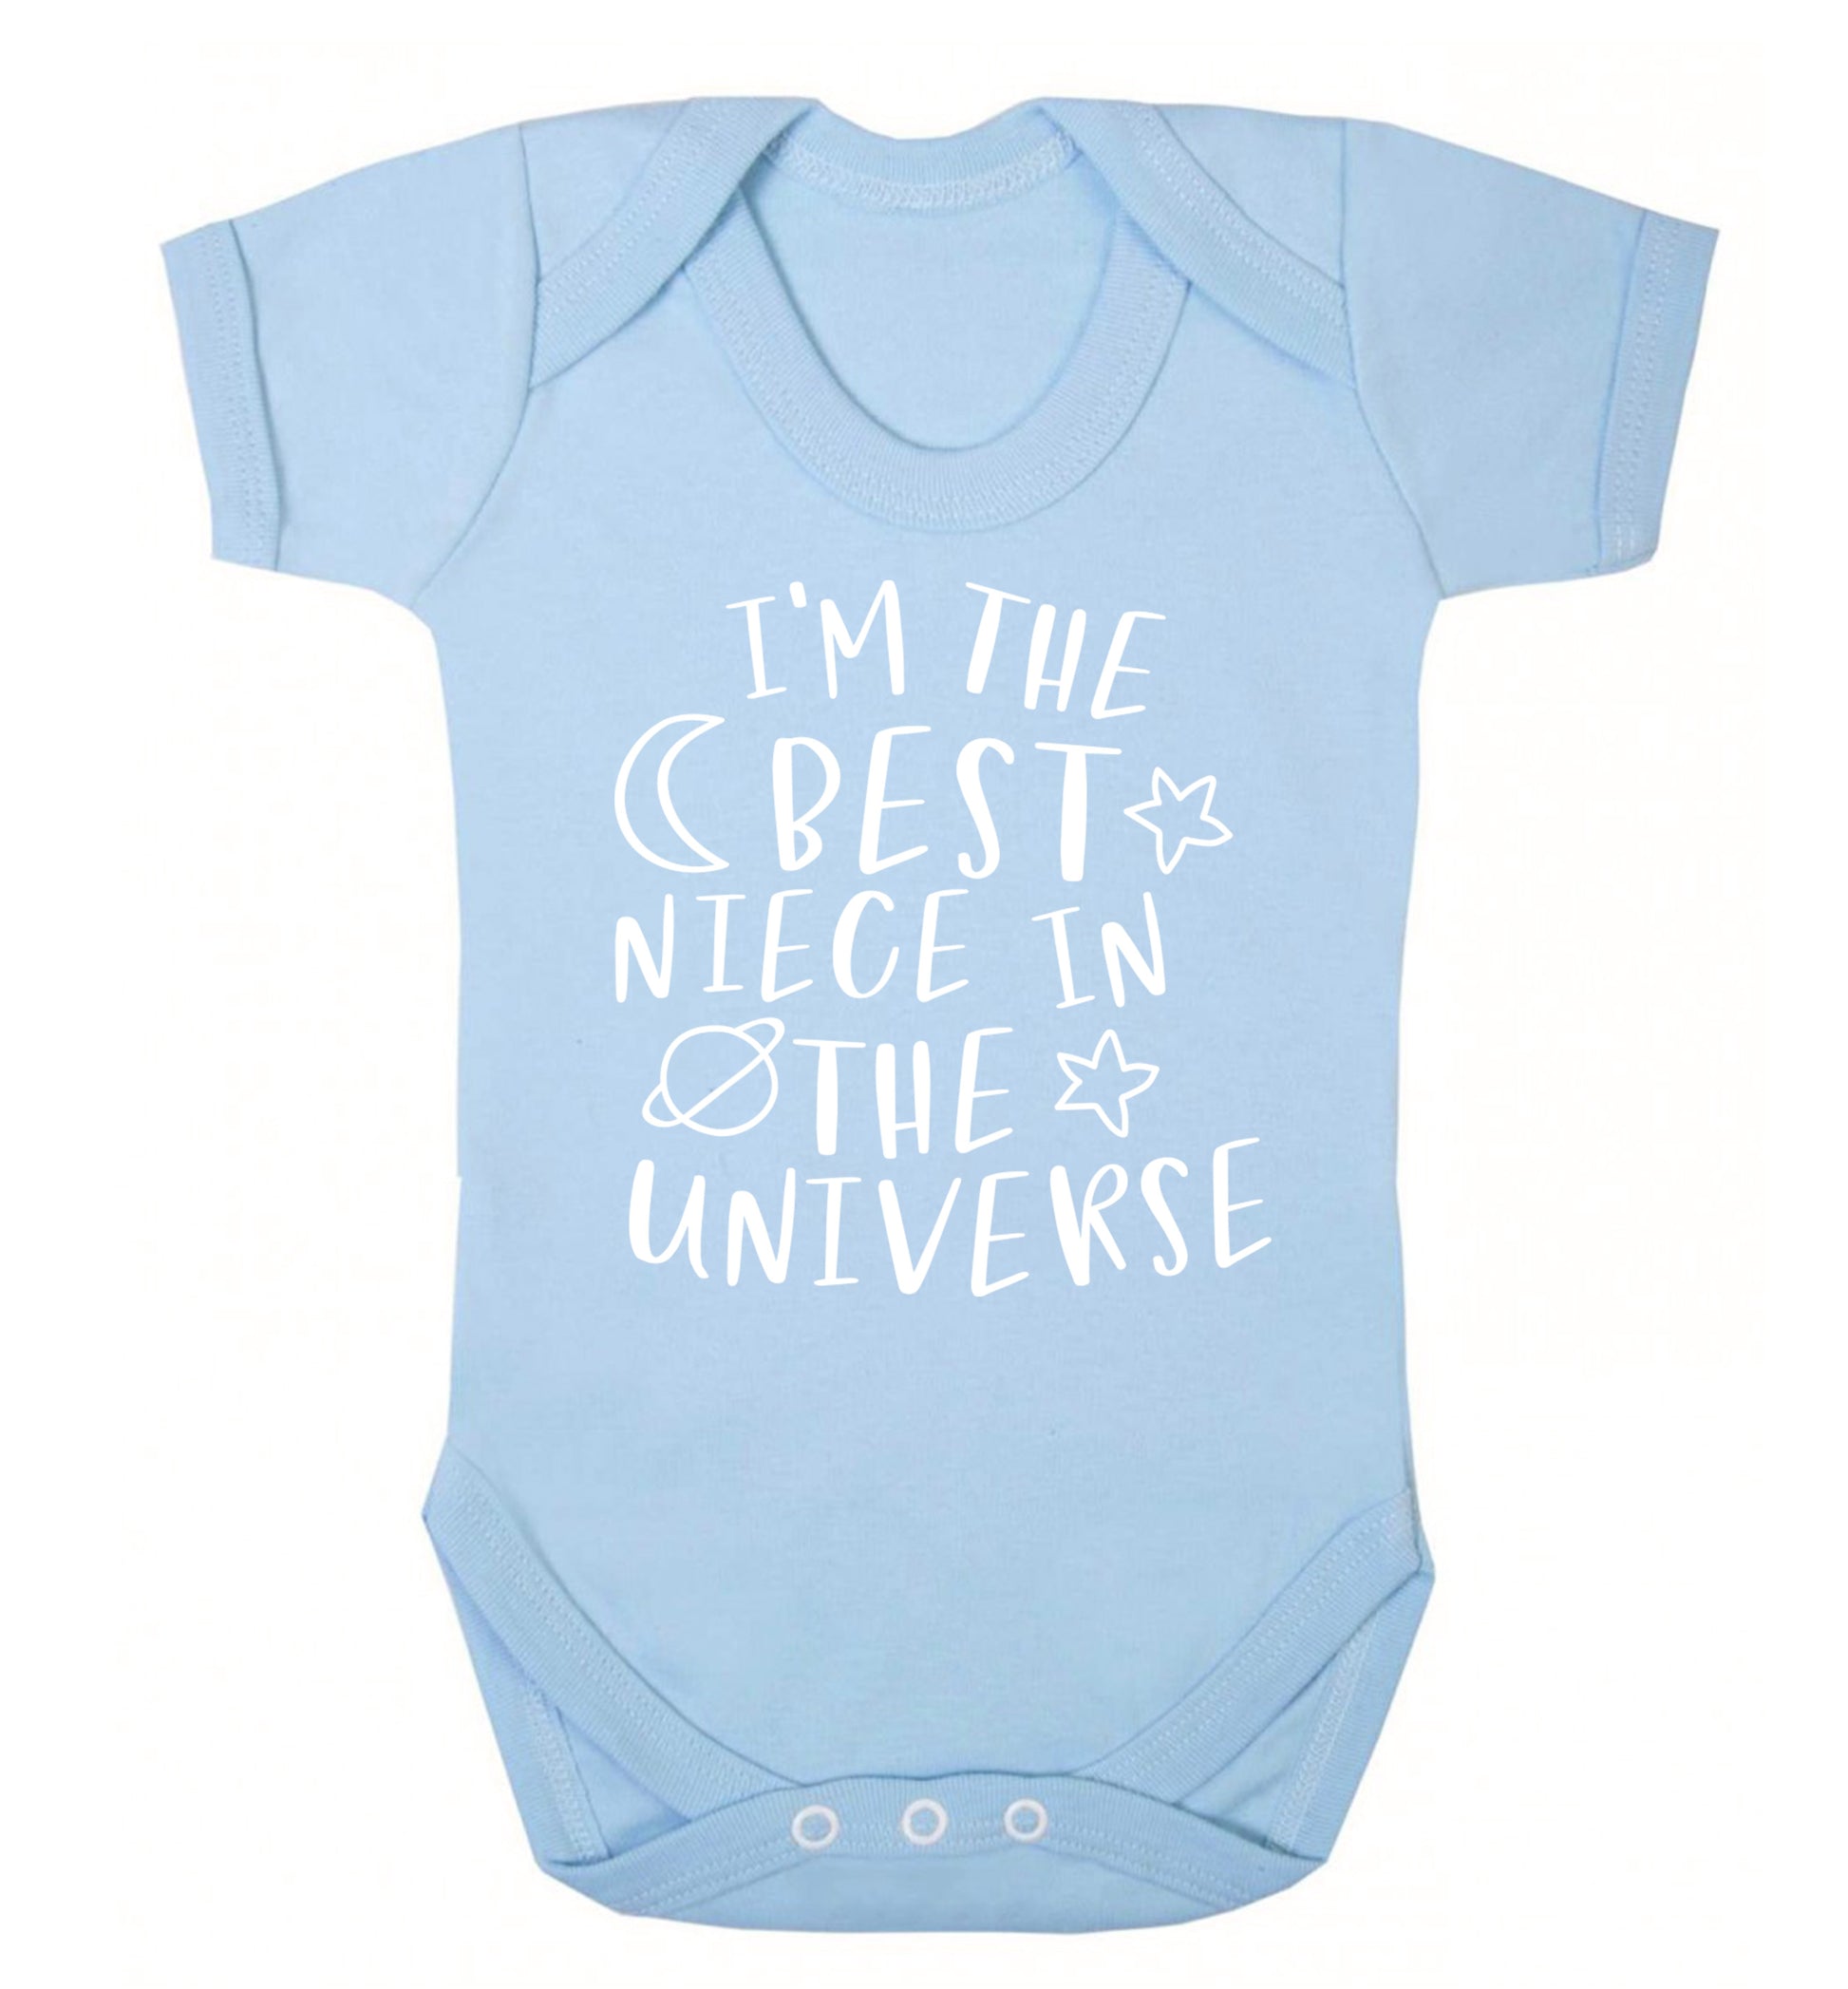 I'm the best niece in the universe Baby Vest pale blue 18-24 months